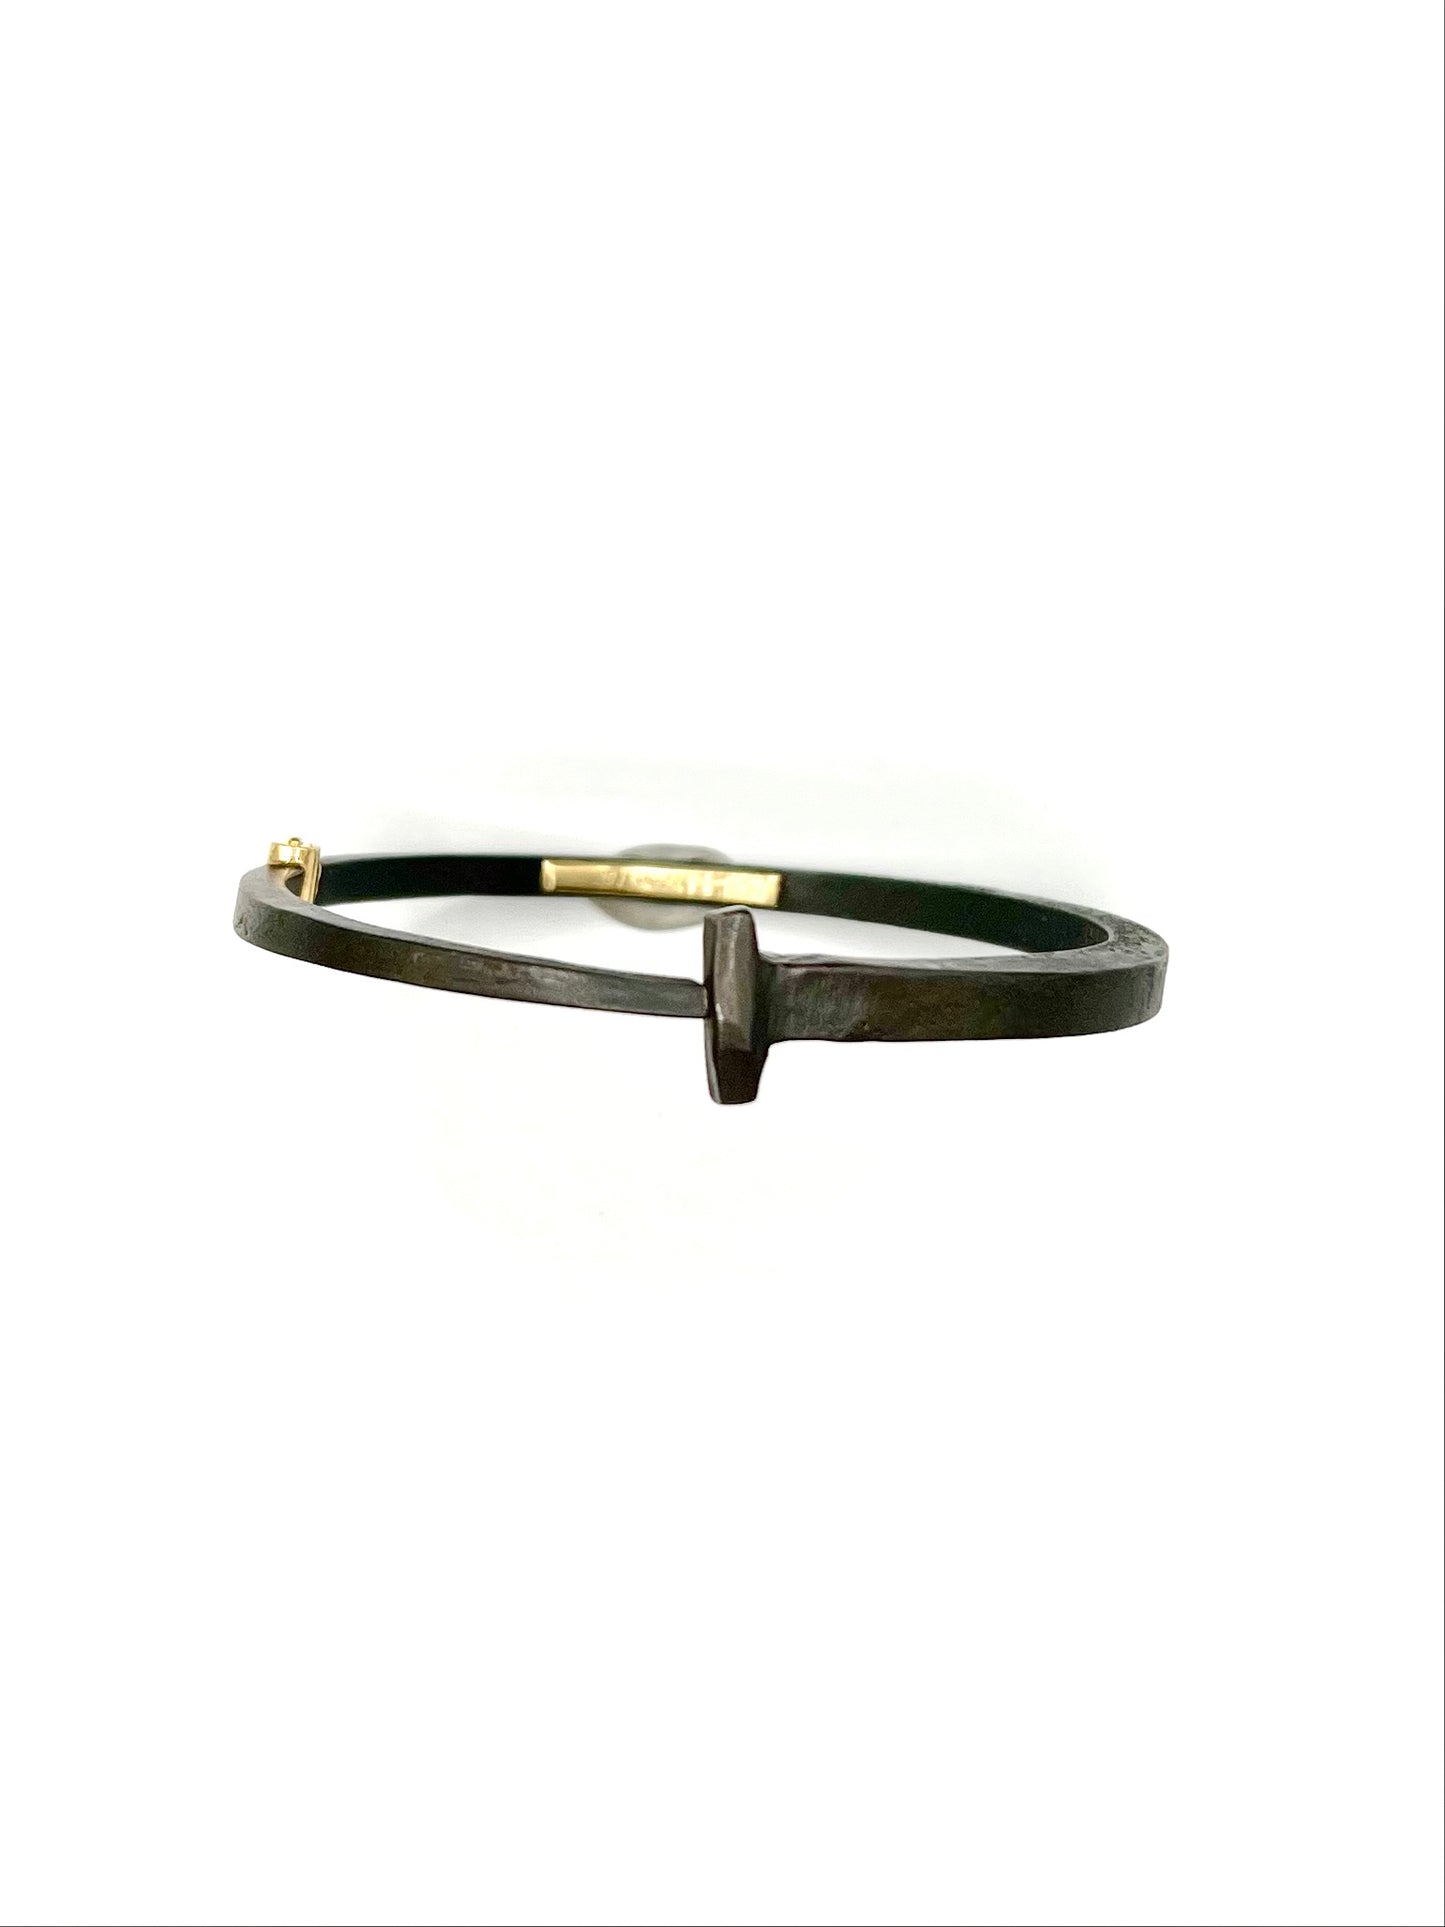 22k Gold and Iron Simple Railroad Spike Cuff